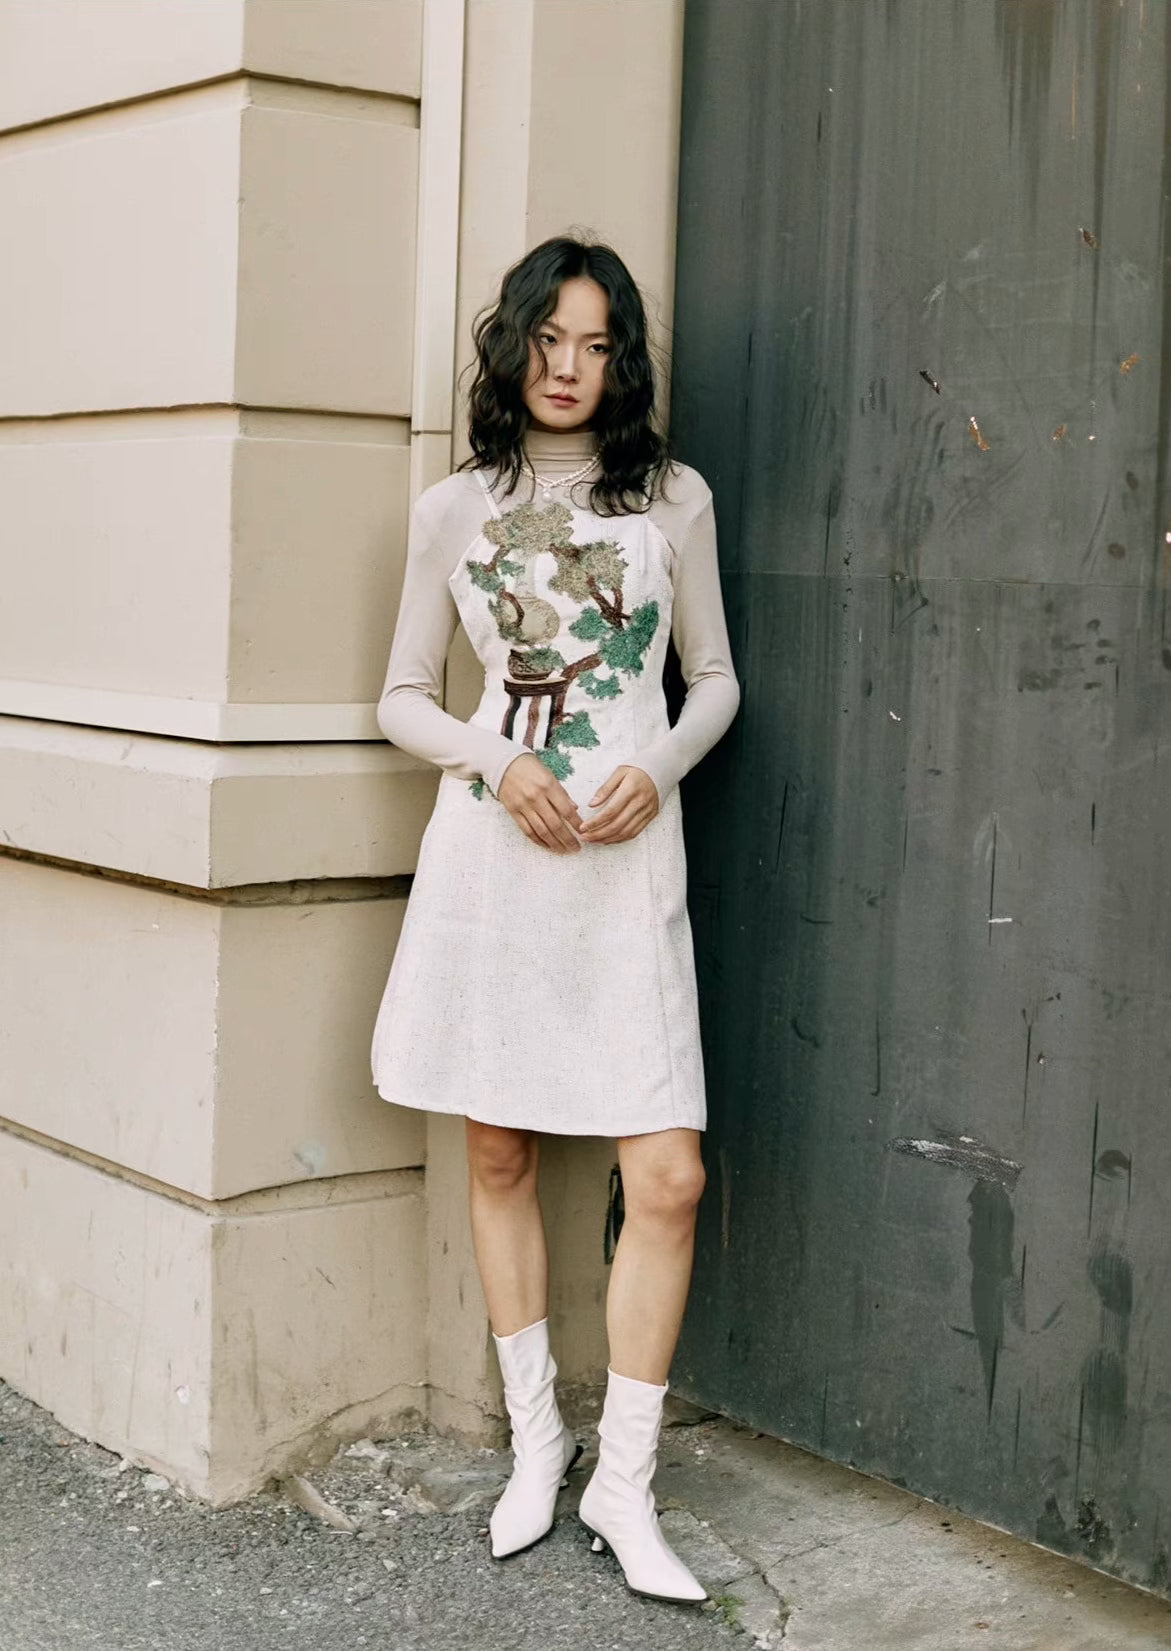 weed potted plant embroidered dress